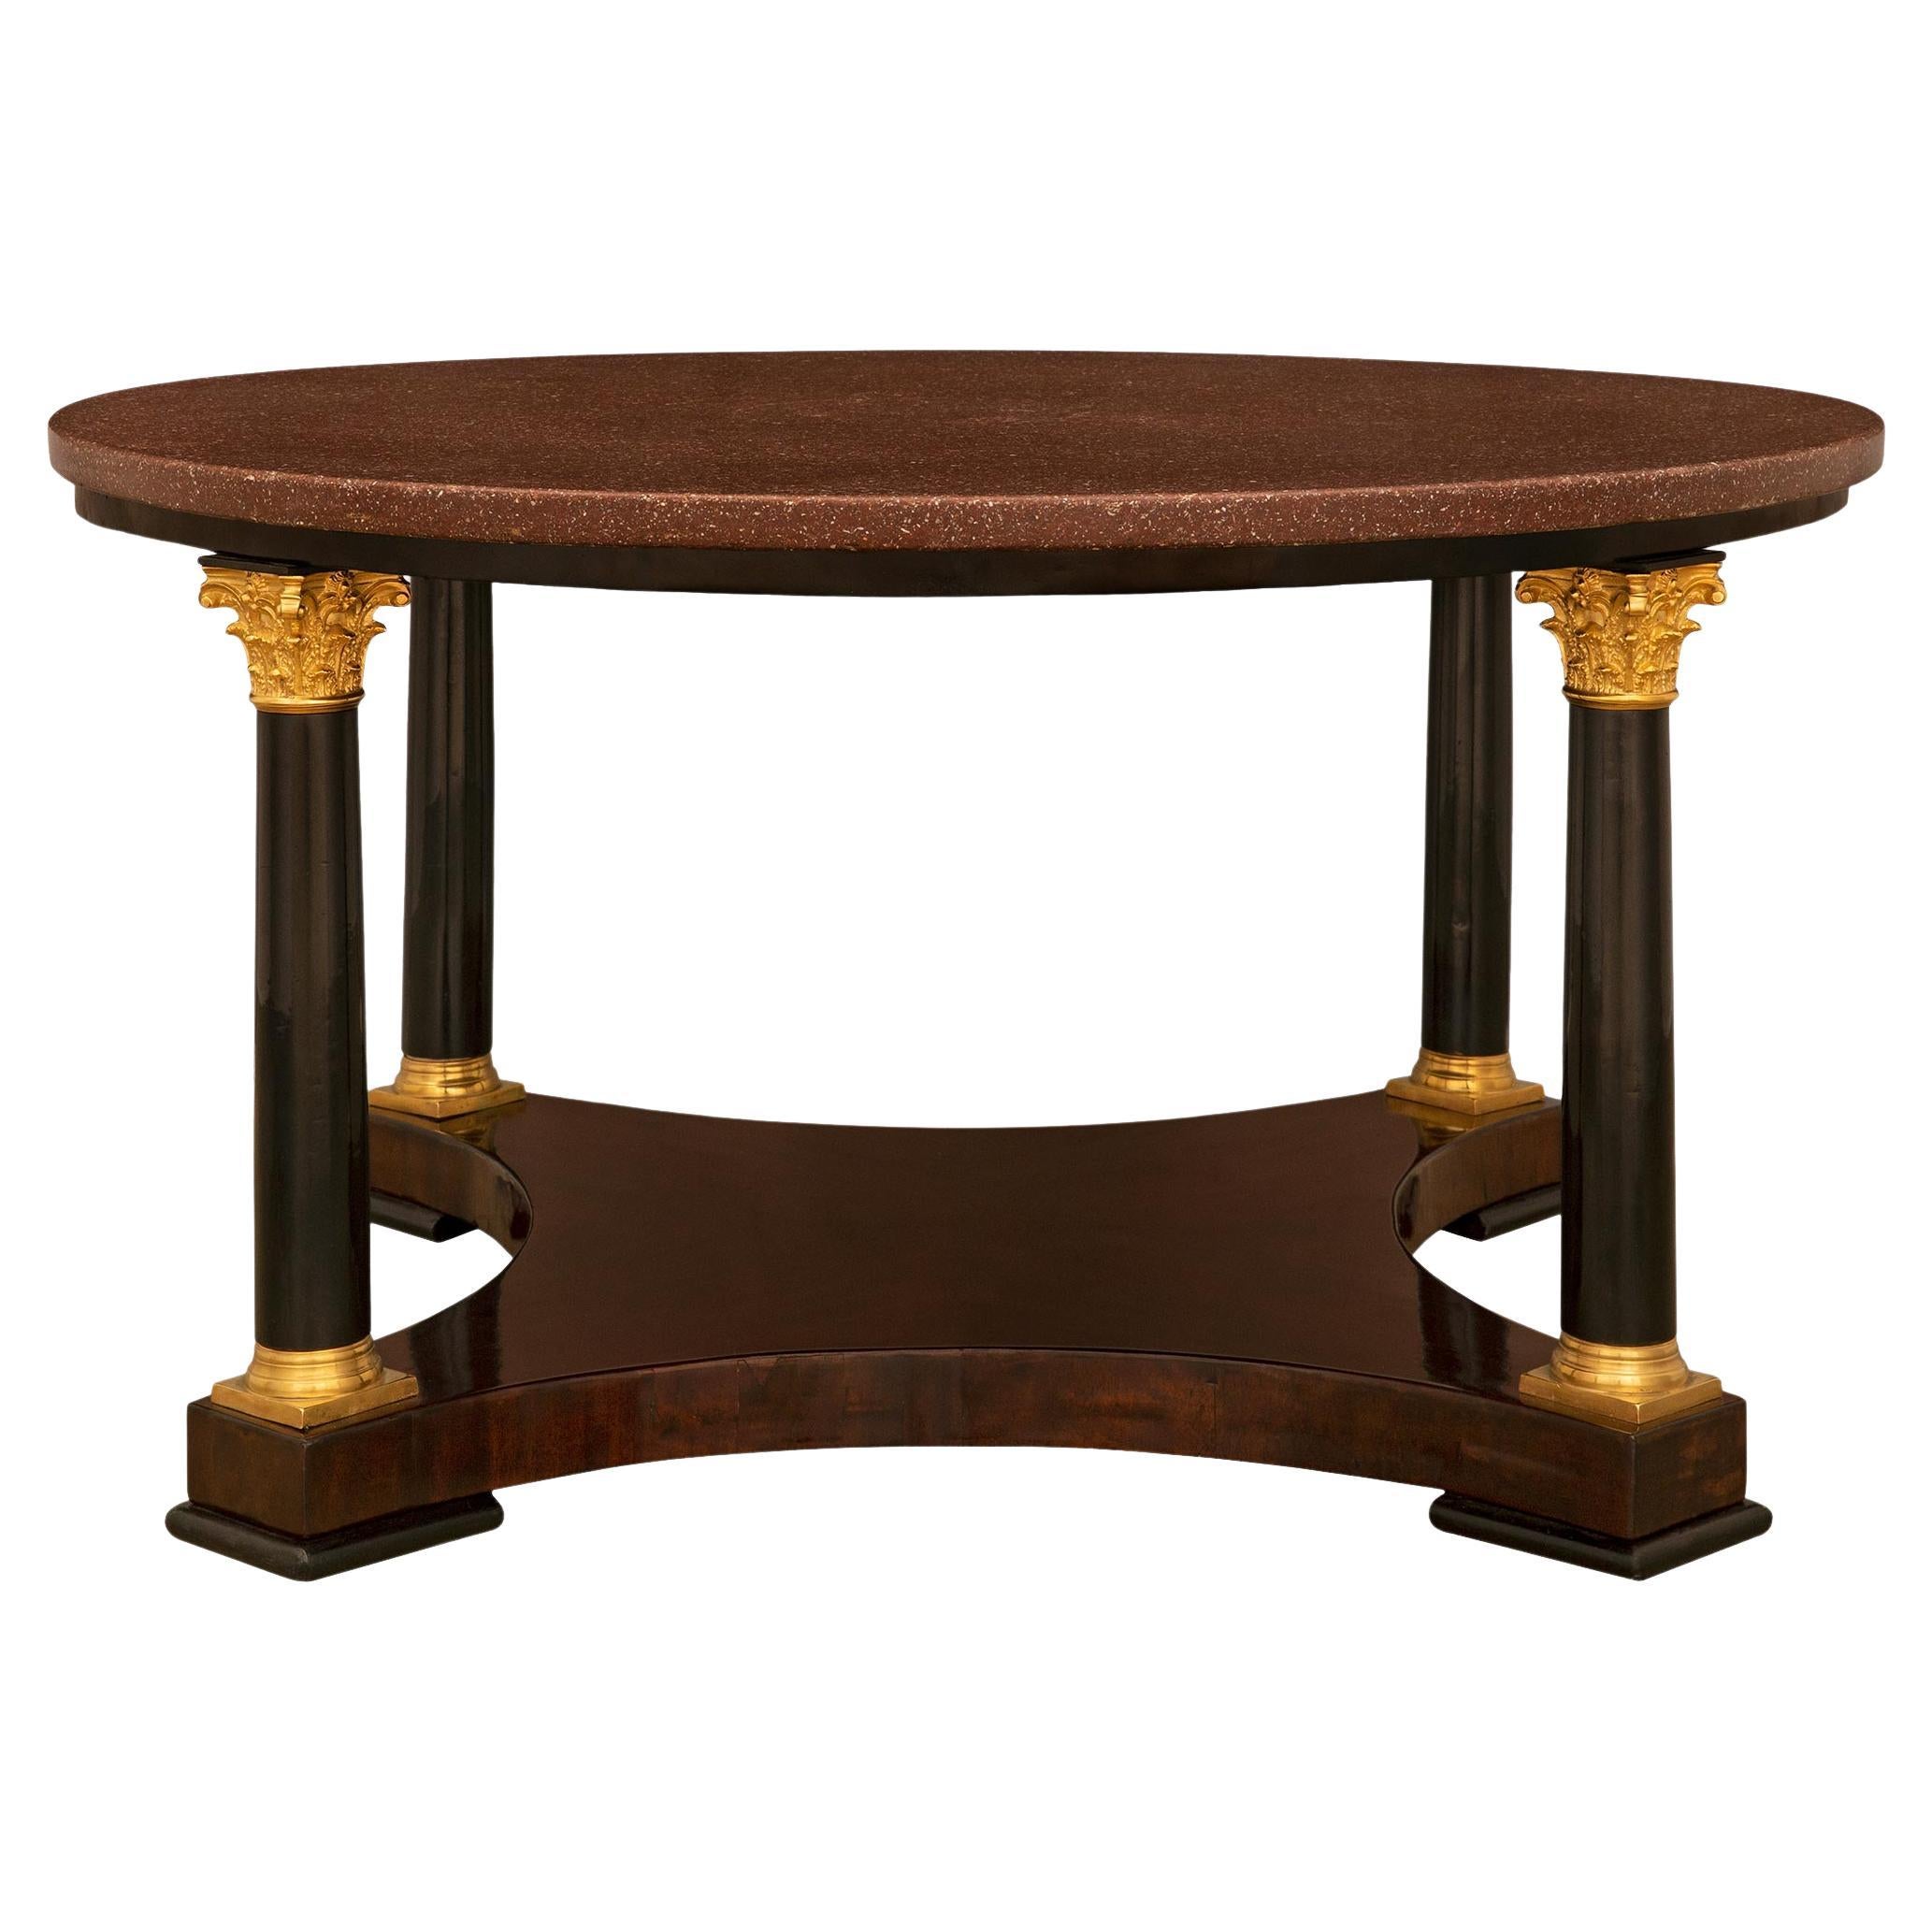 19th Century Neoclassical Style Mahogany, Ormolu and Porphyry Coffee Table